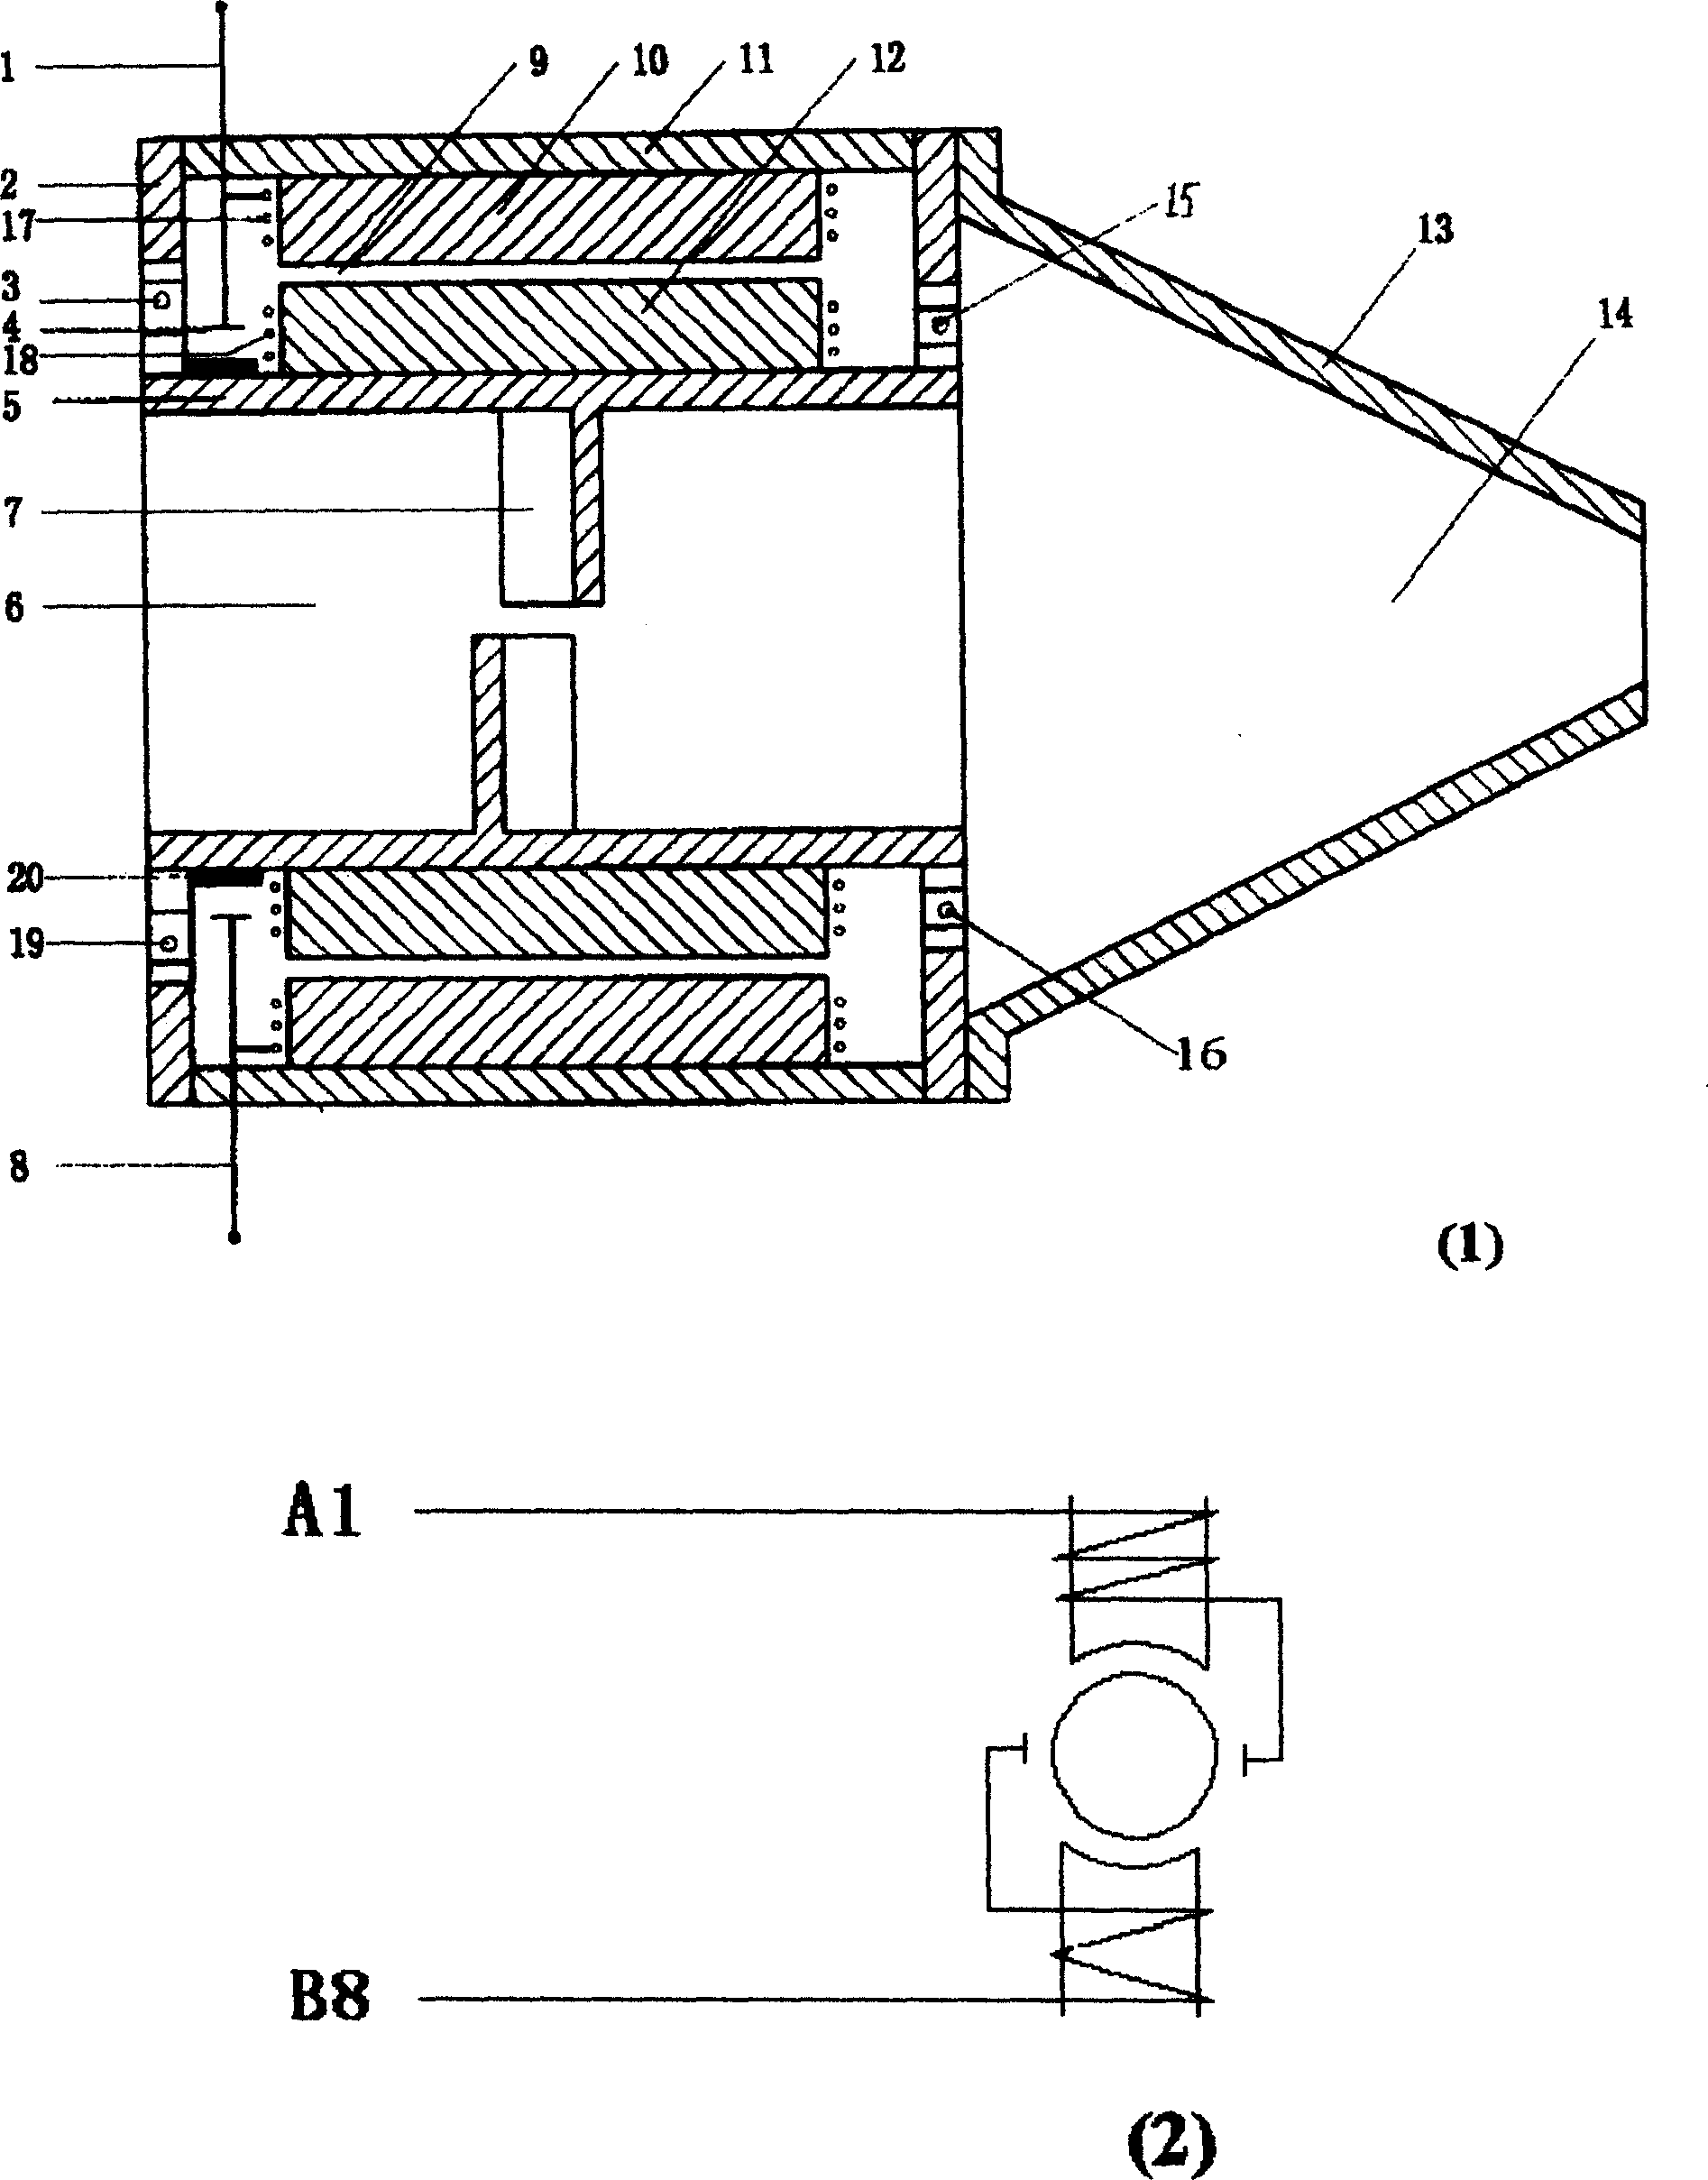 Sea-land-air carrier using sodium battery as energy and air-core motor as power